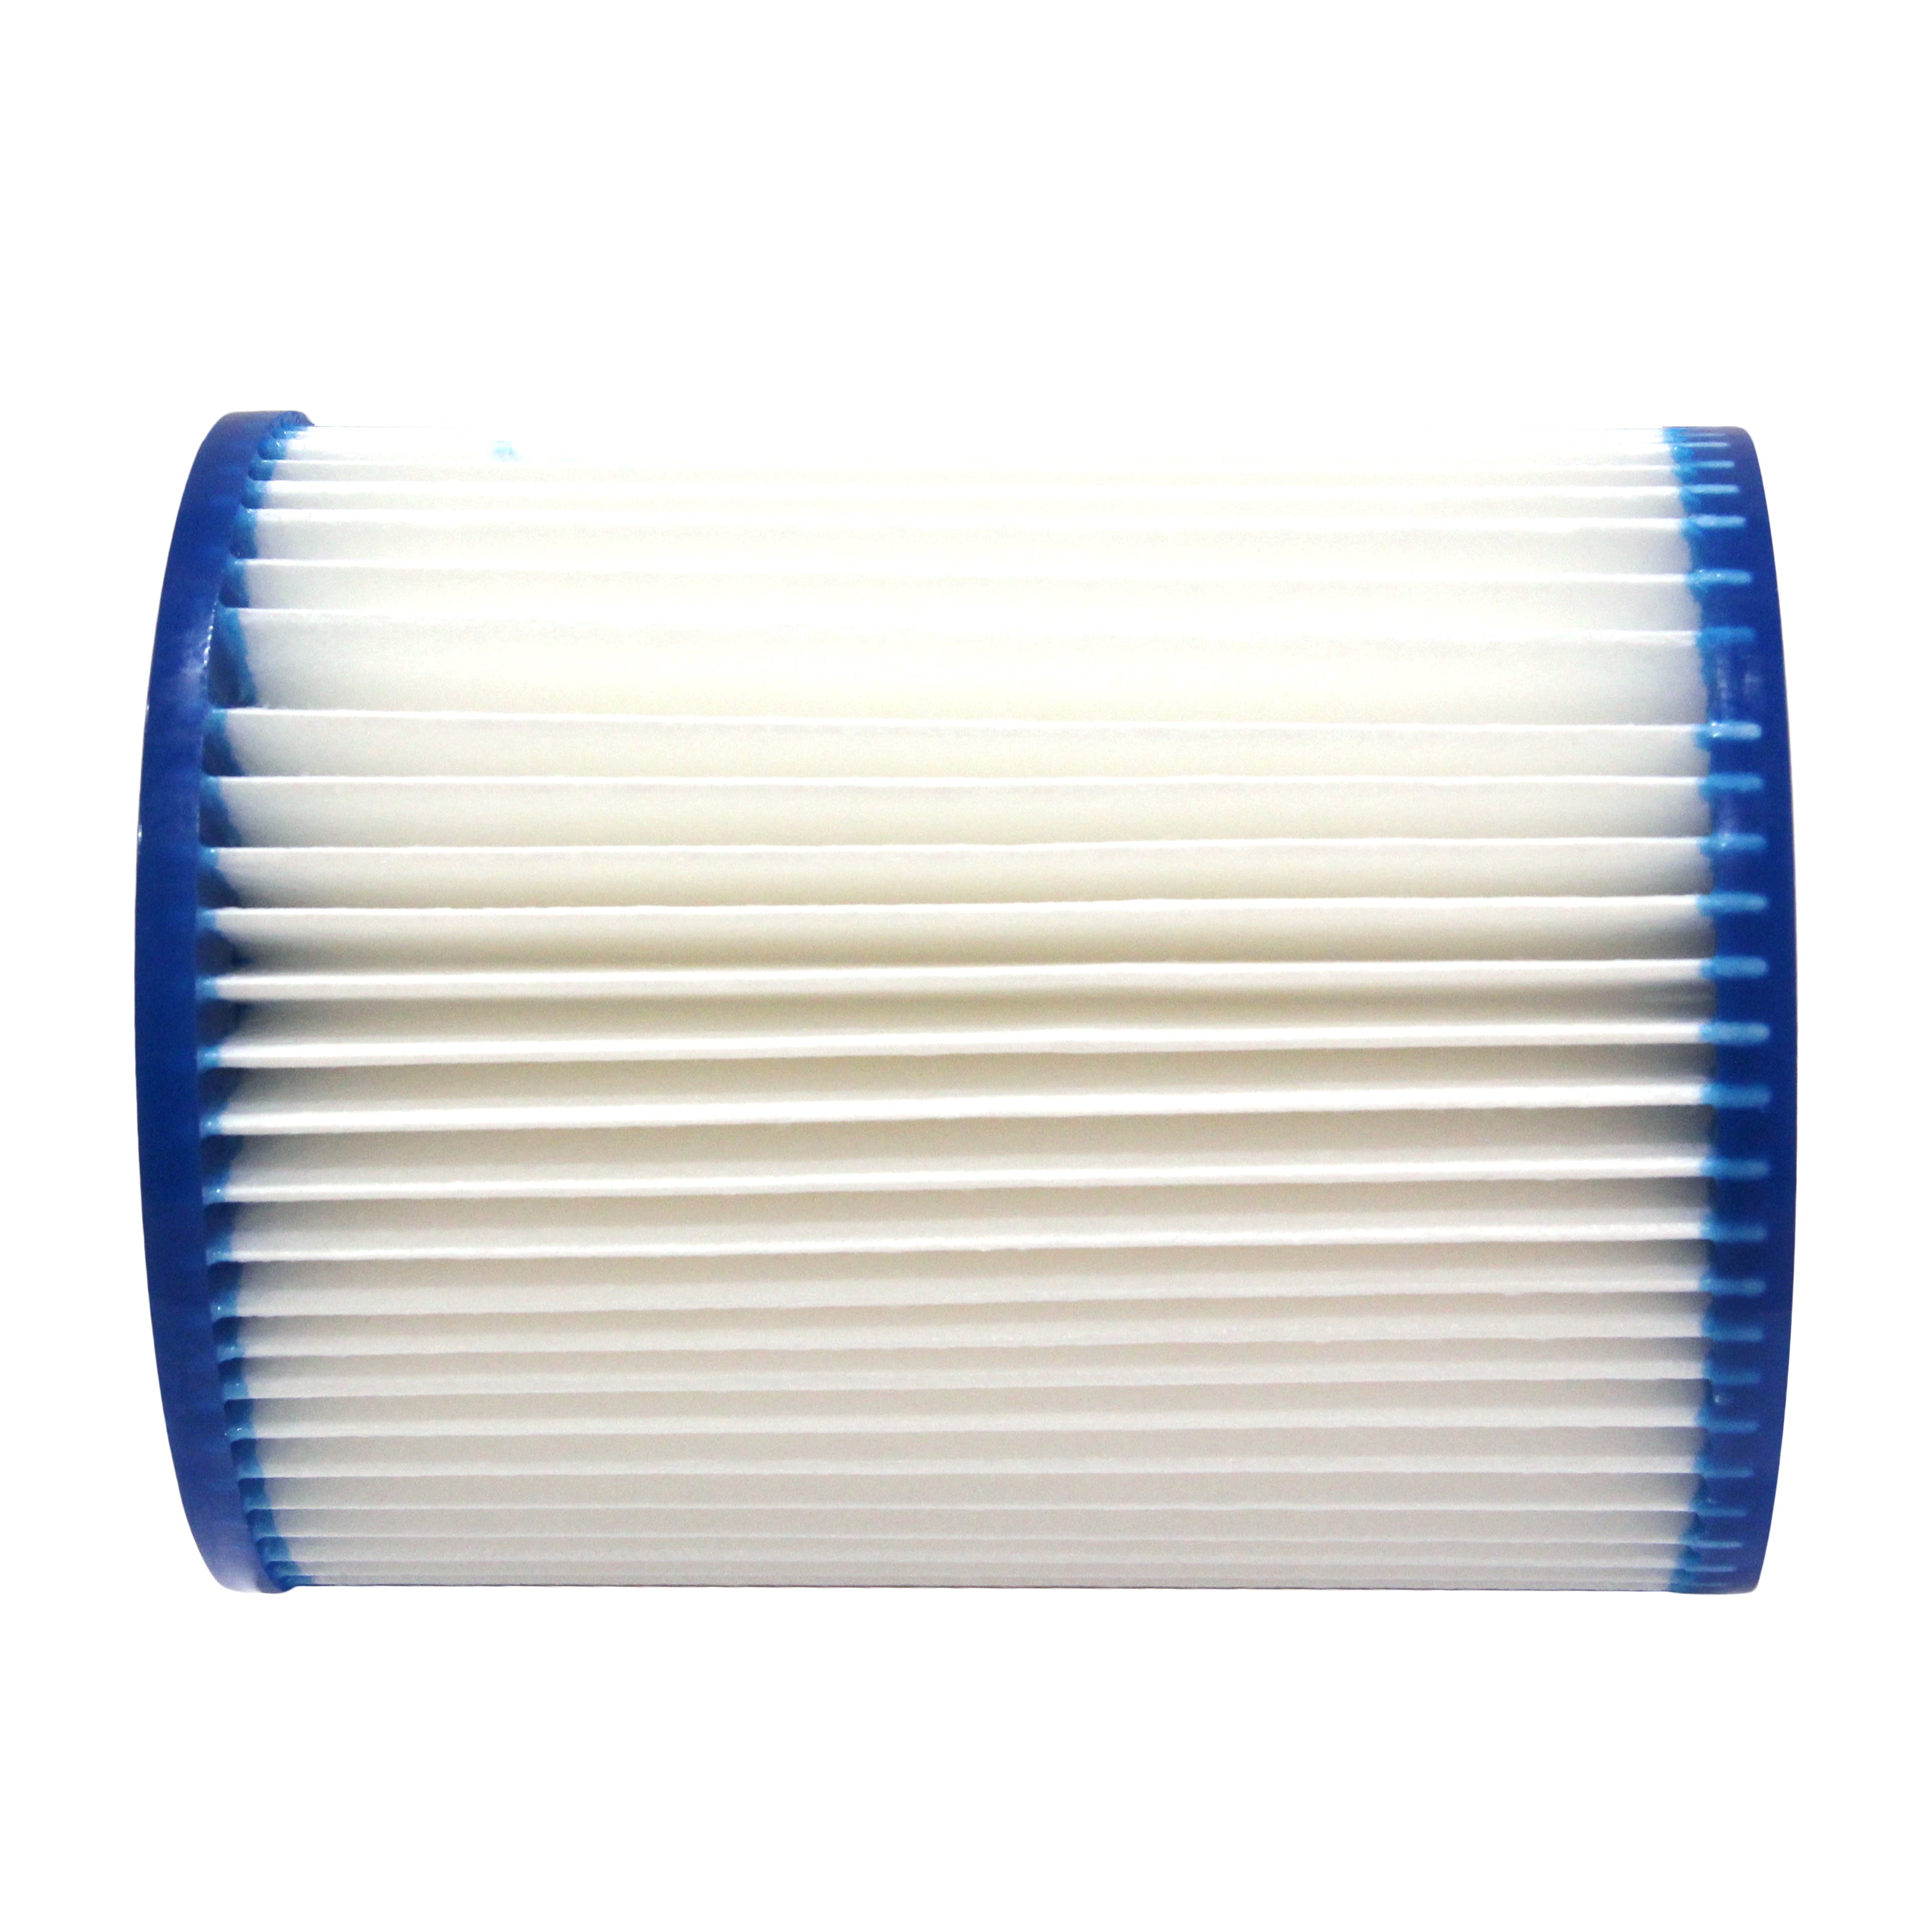 Replacement Filter for Bestway Filter Cartridge II Lay Z Spa Filter pump